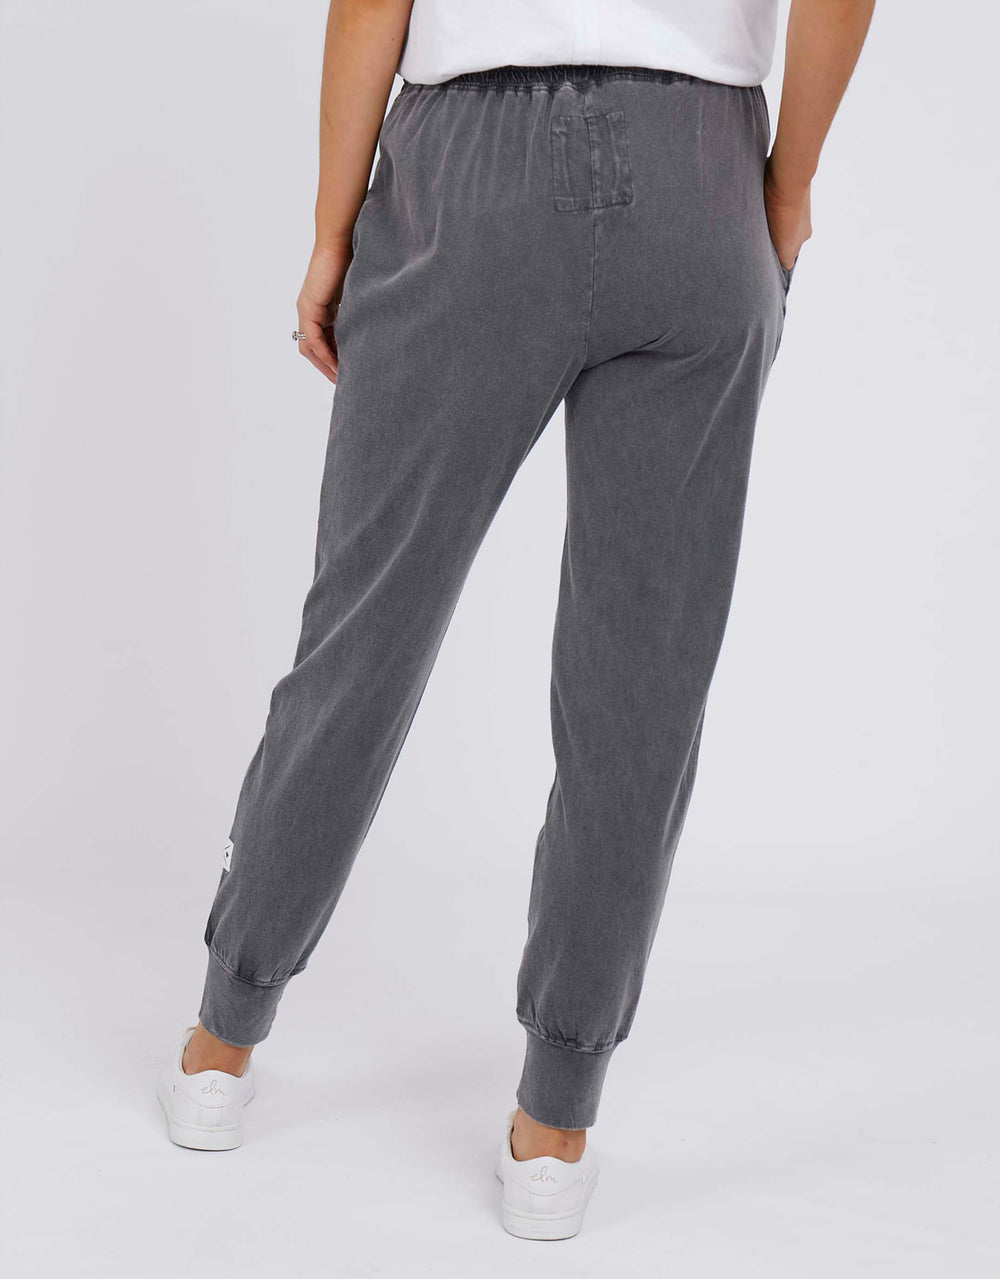 elm-cloud-wash-out-pant-charcoal-womens-clothing